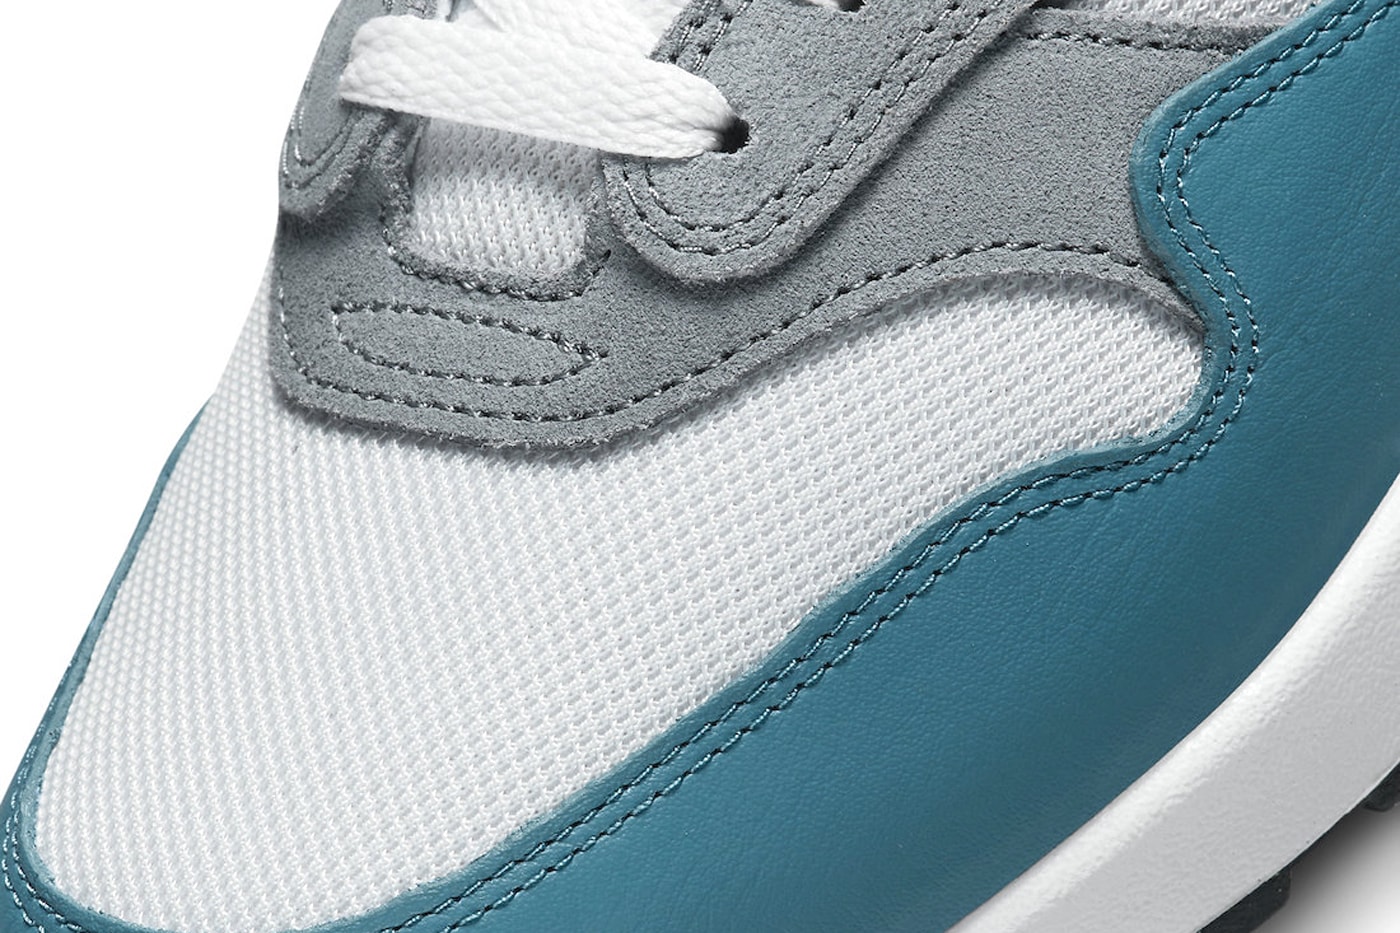 Nike Air Max 1 SC "Noise Aqua" Has an Official Fall Release Date FB9660-001 Photon Dust/White-Cool Grey-Noise Aqua october 20223 swoosh sneakers